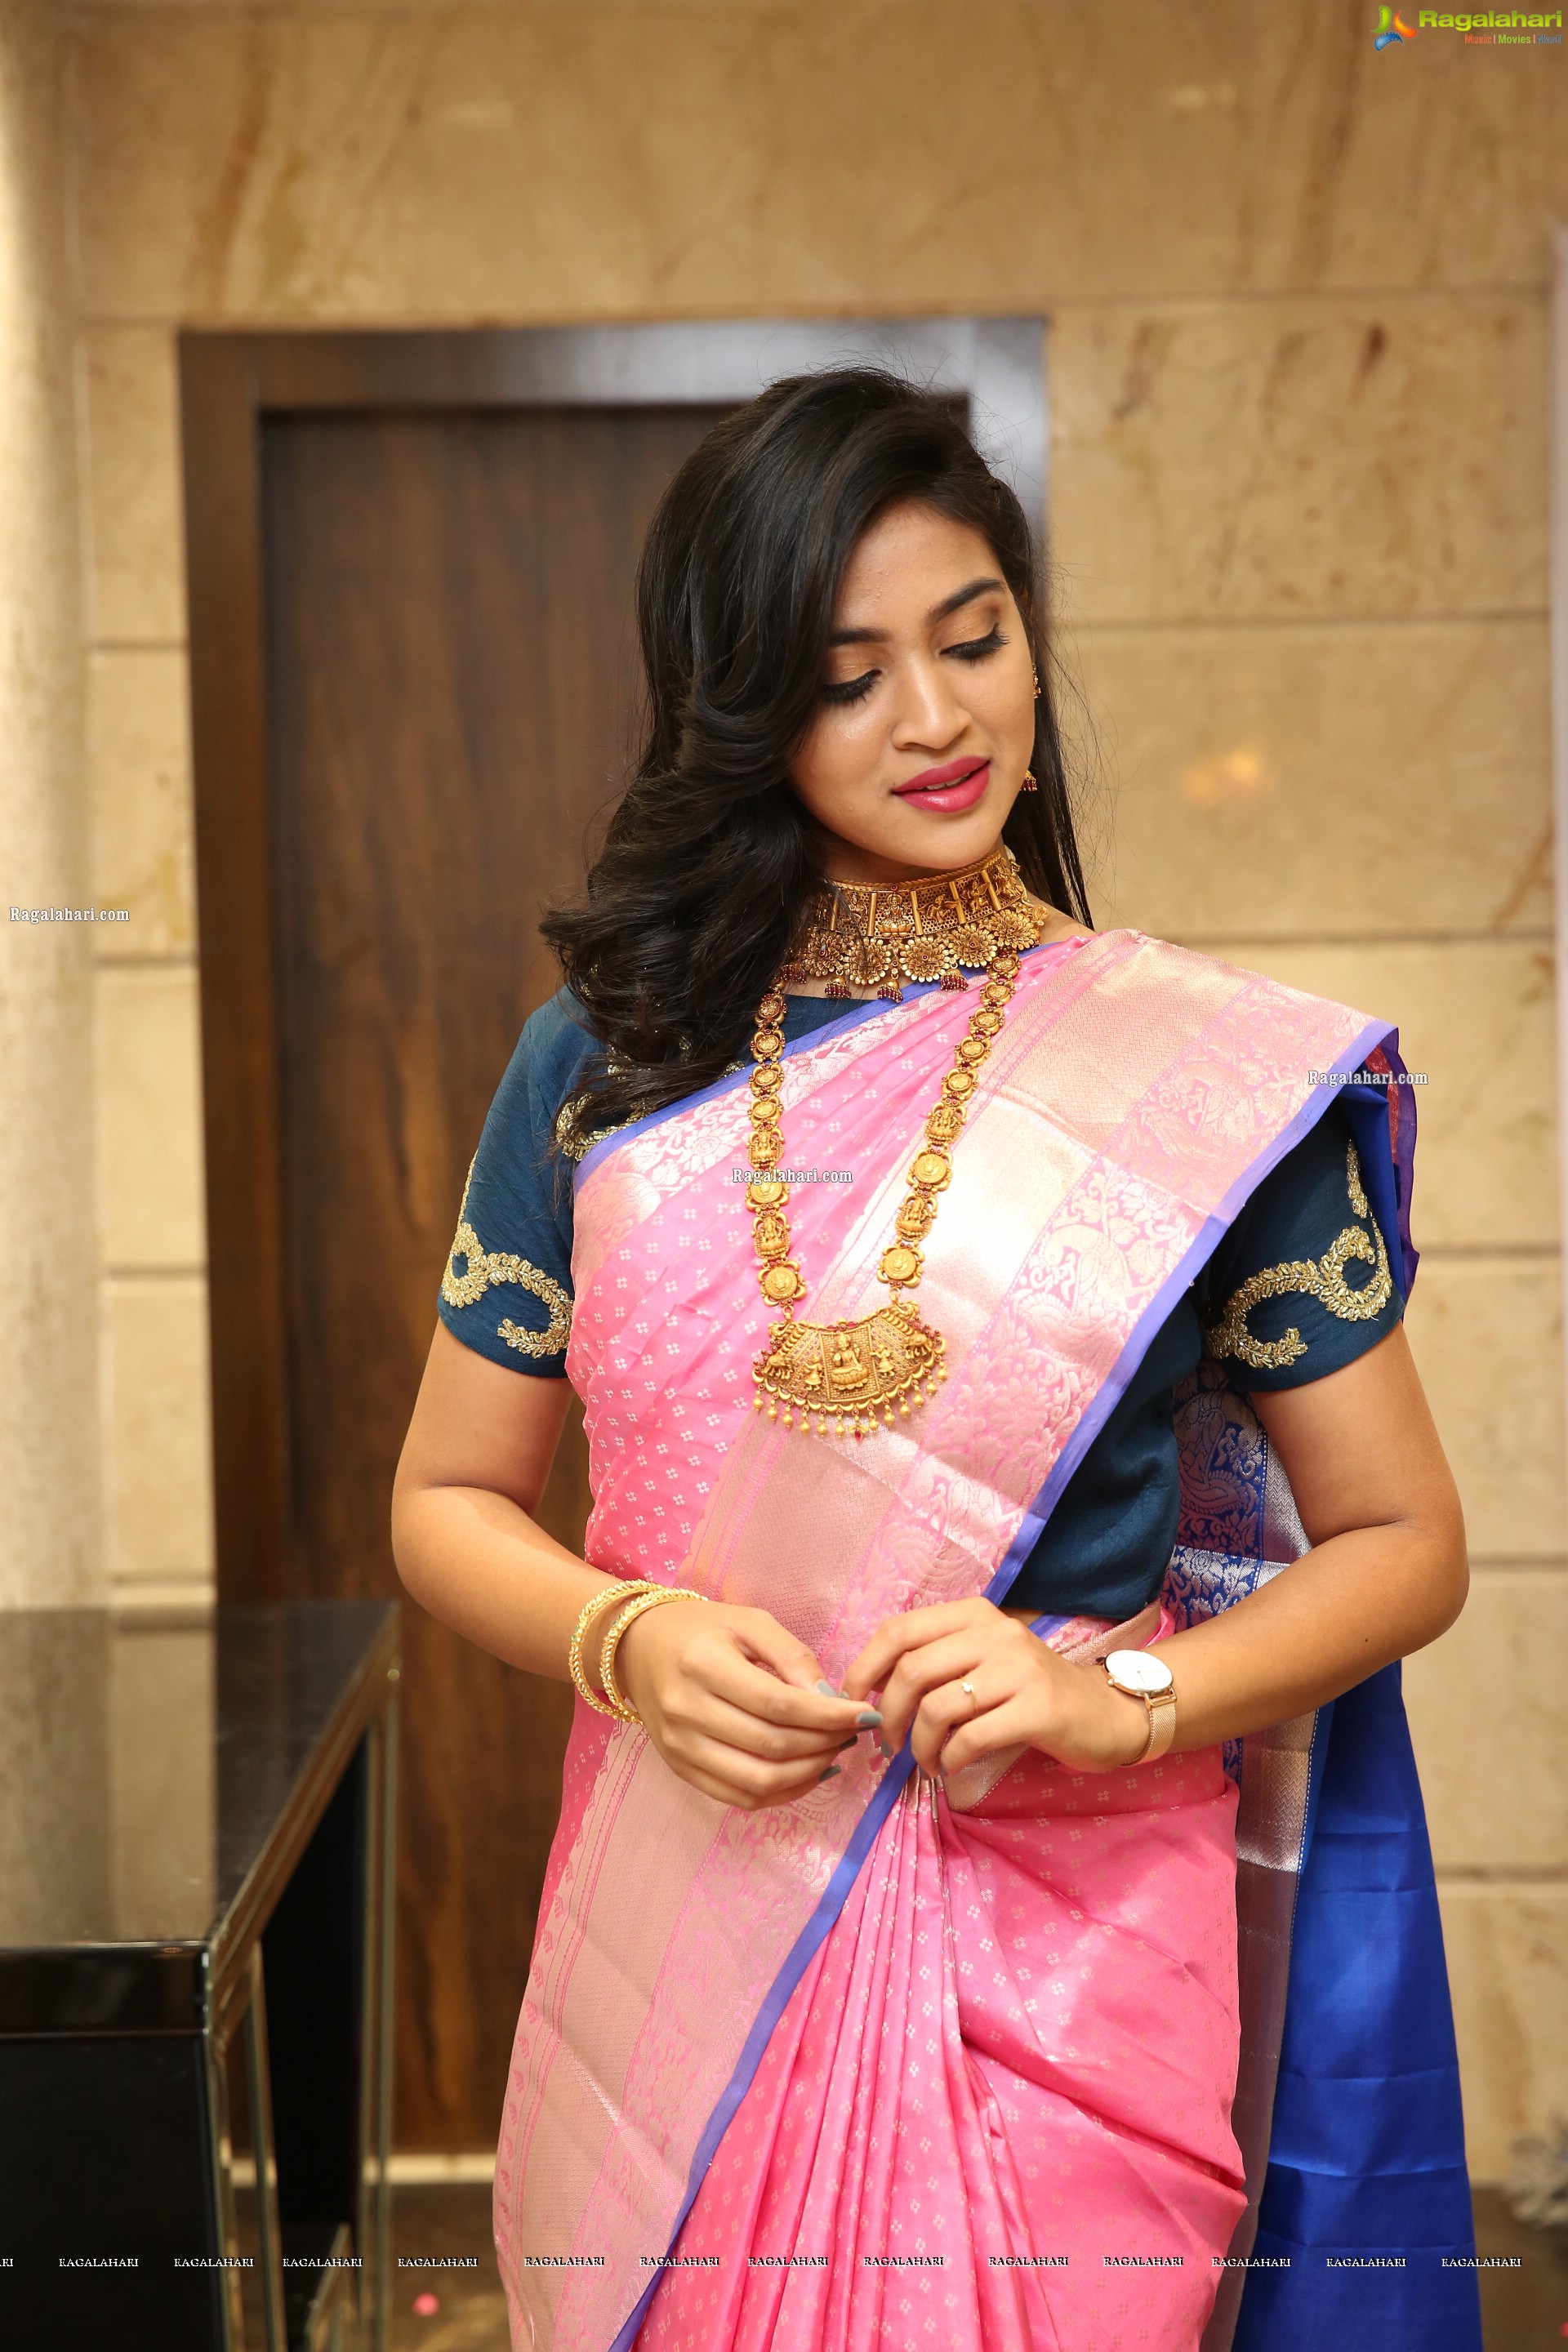 Vakshika Latha at Manepally Jewellers Silverware Section Launch at Its Dilsukhnagar Store - HD Gallery